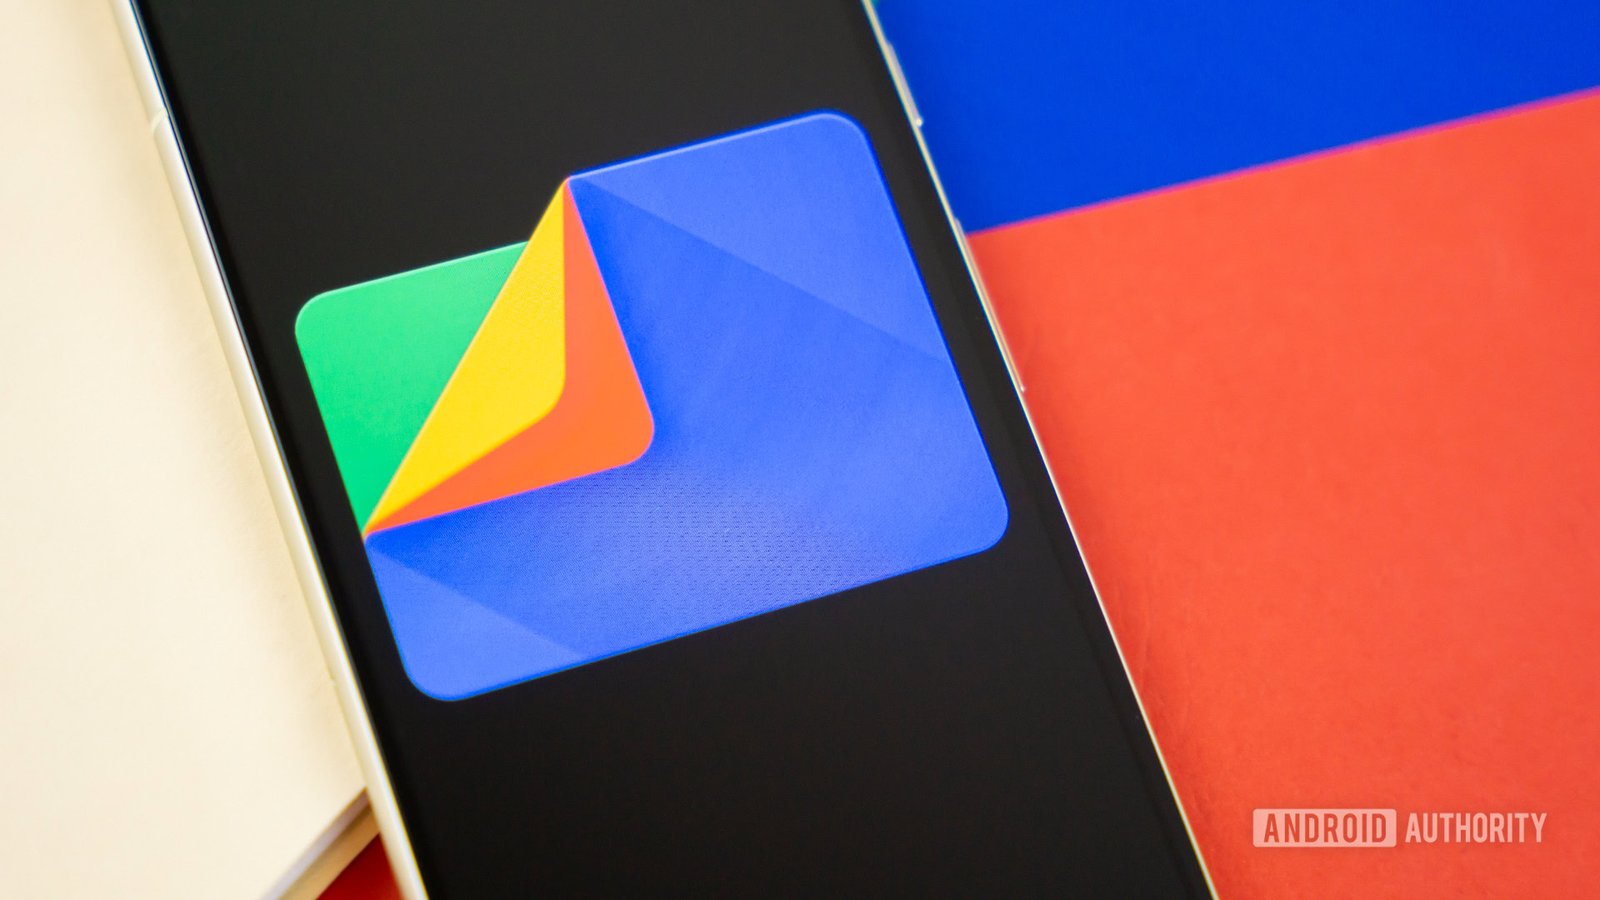 Google could soon add Quick Share directly in the Files app (APK teardown)